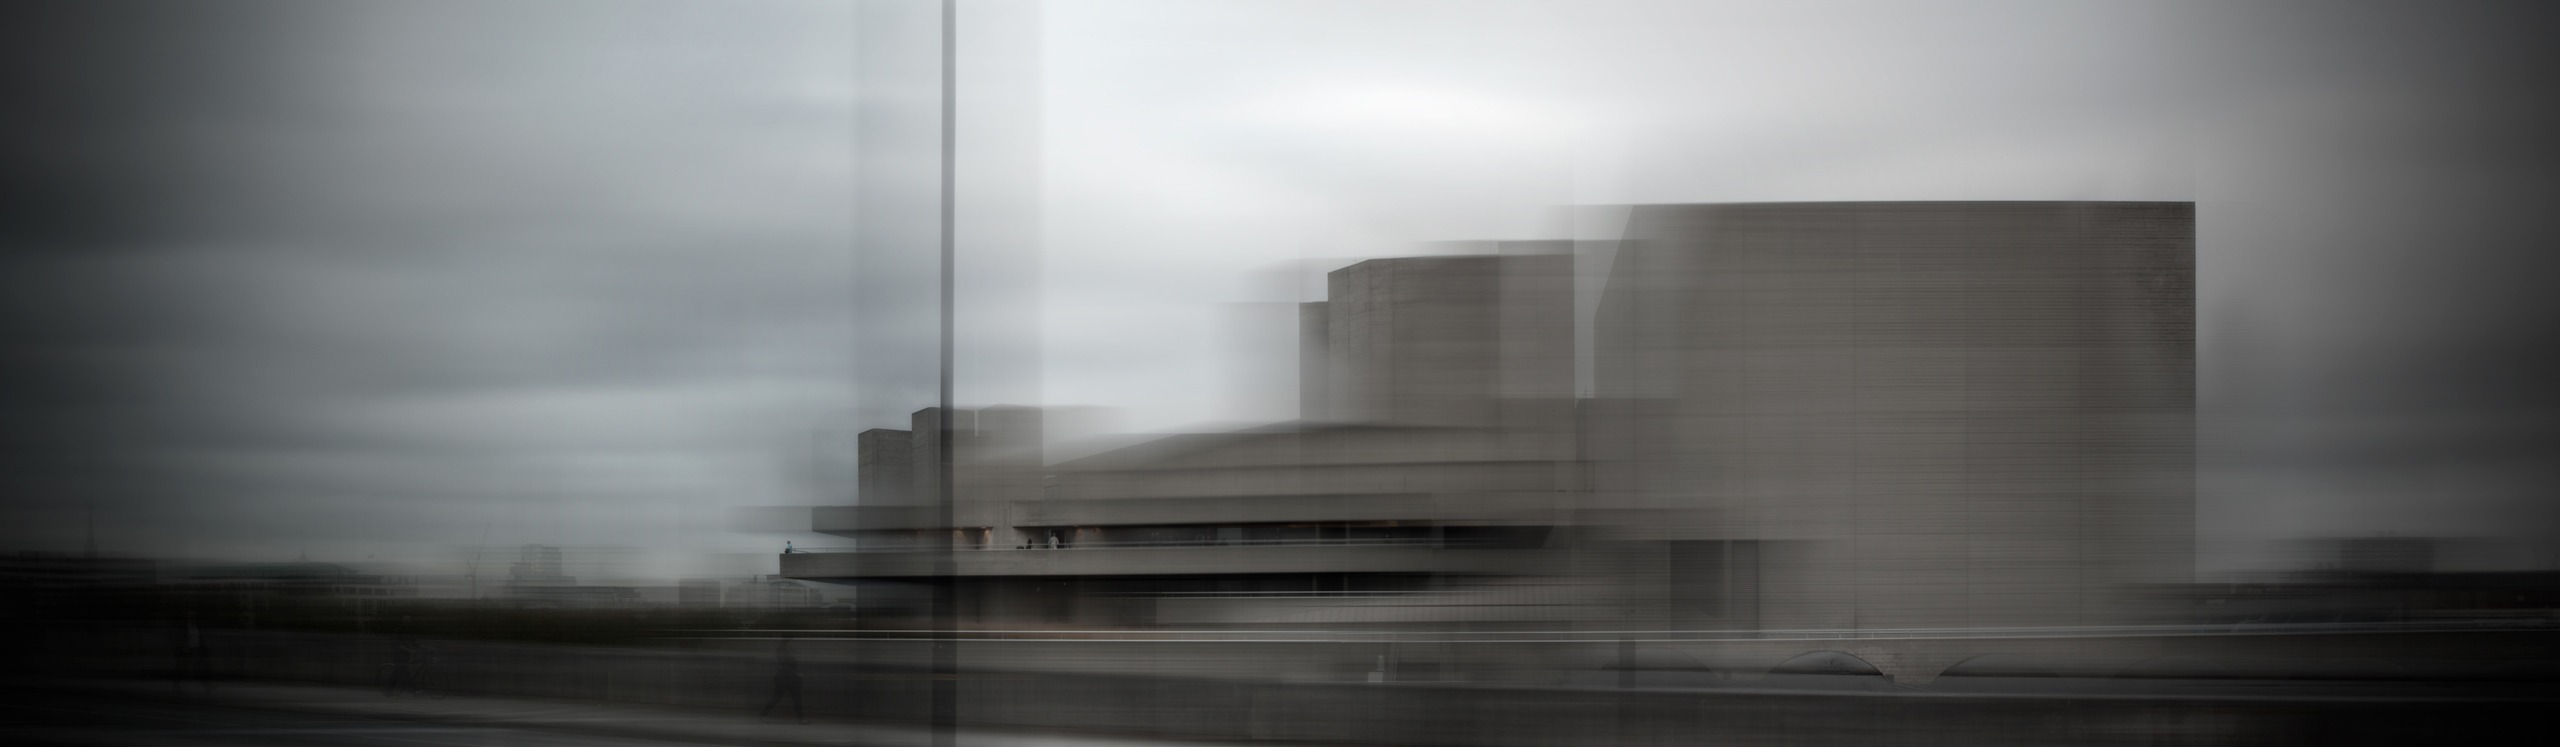 CITYscapes London - Royal National Theatre I